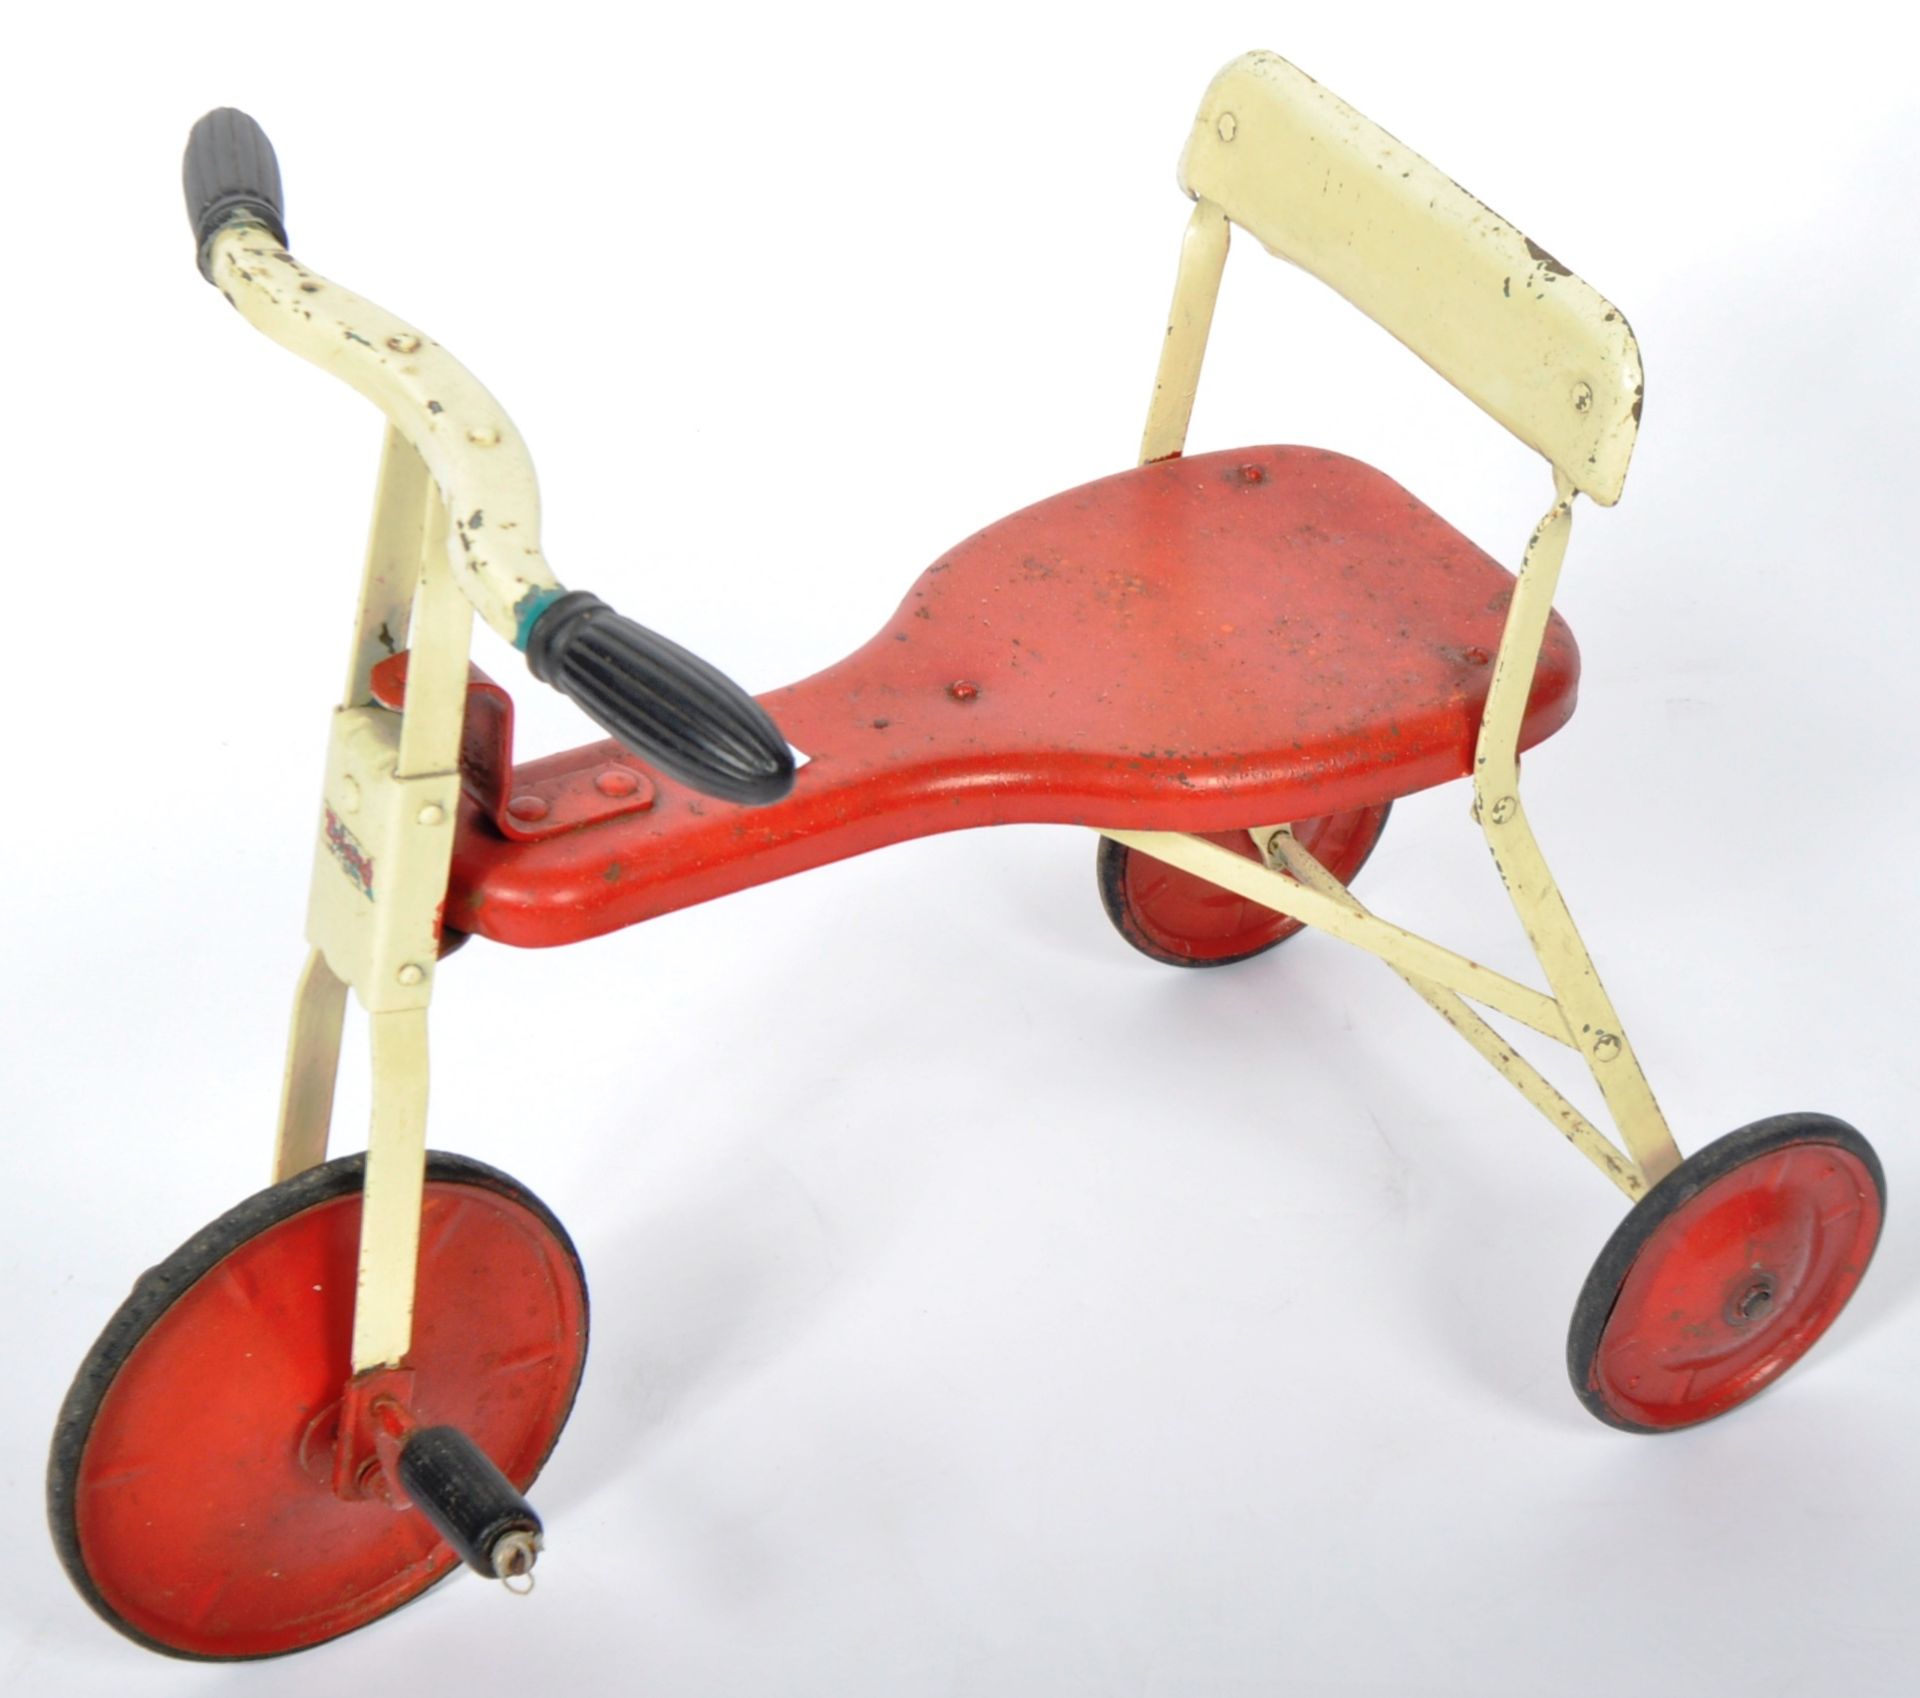 TRI-ANG - MID CENTURY CHILDS TRICYCLE WITH ORIGINAL PAINT - Image 2 of 7